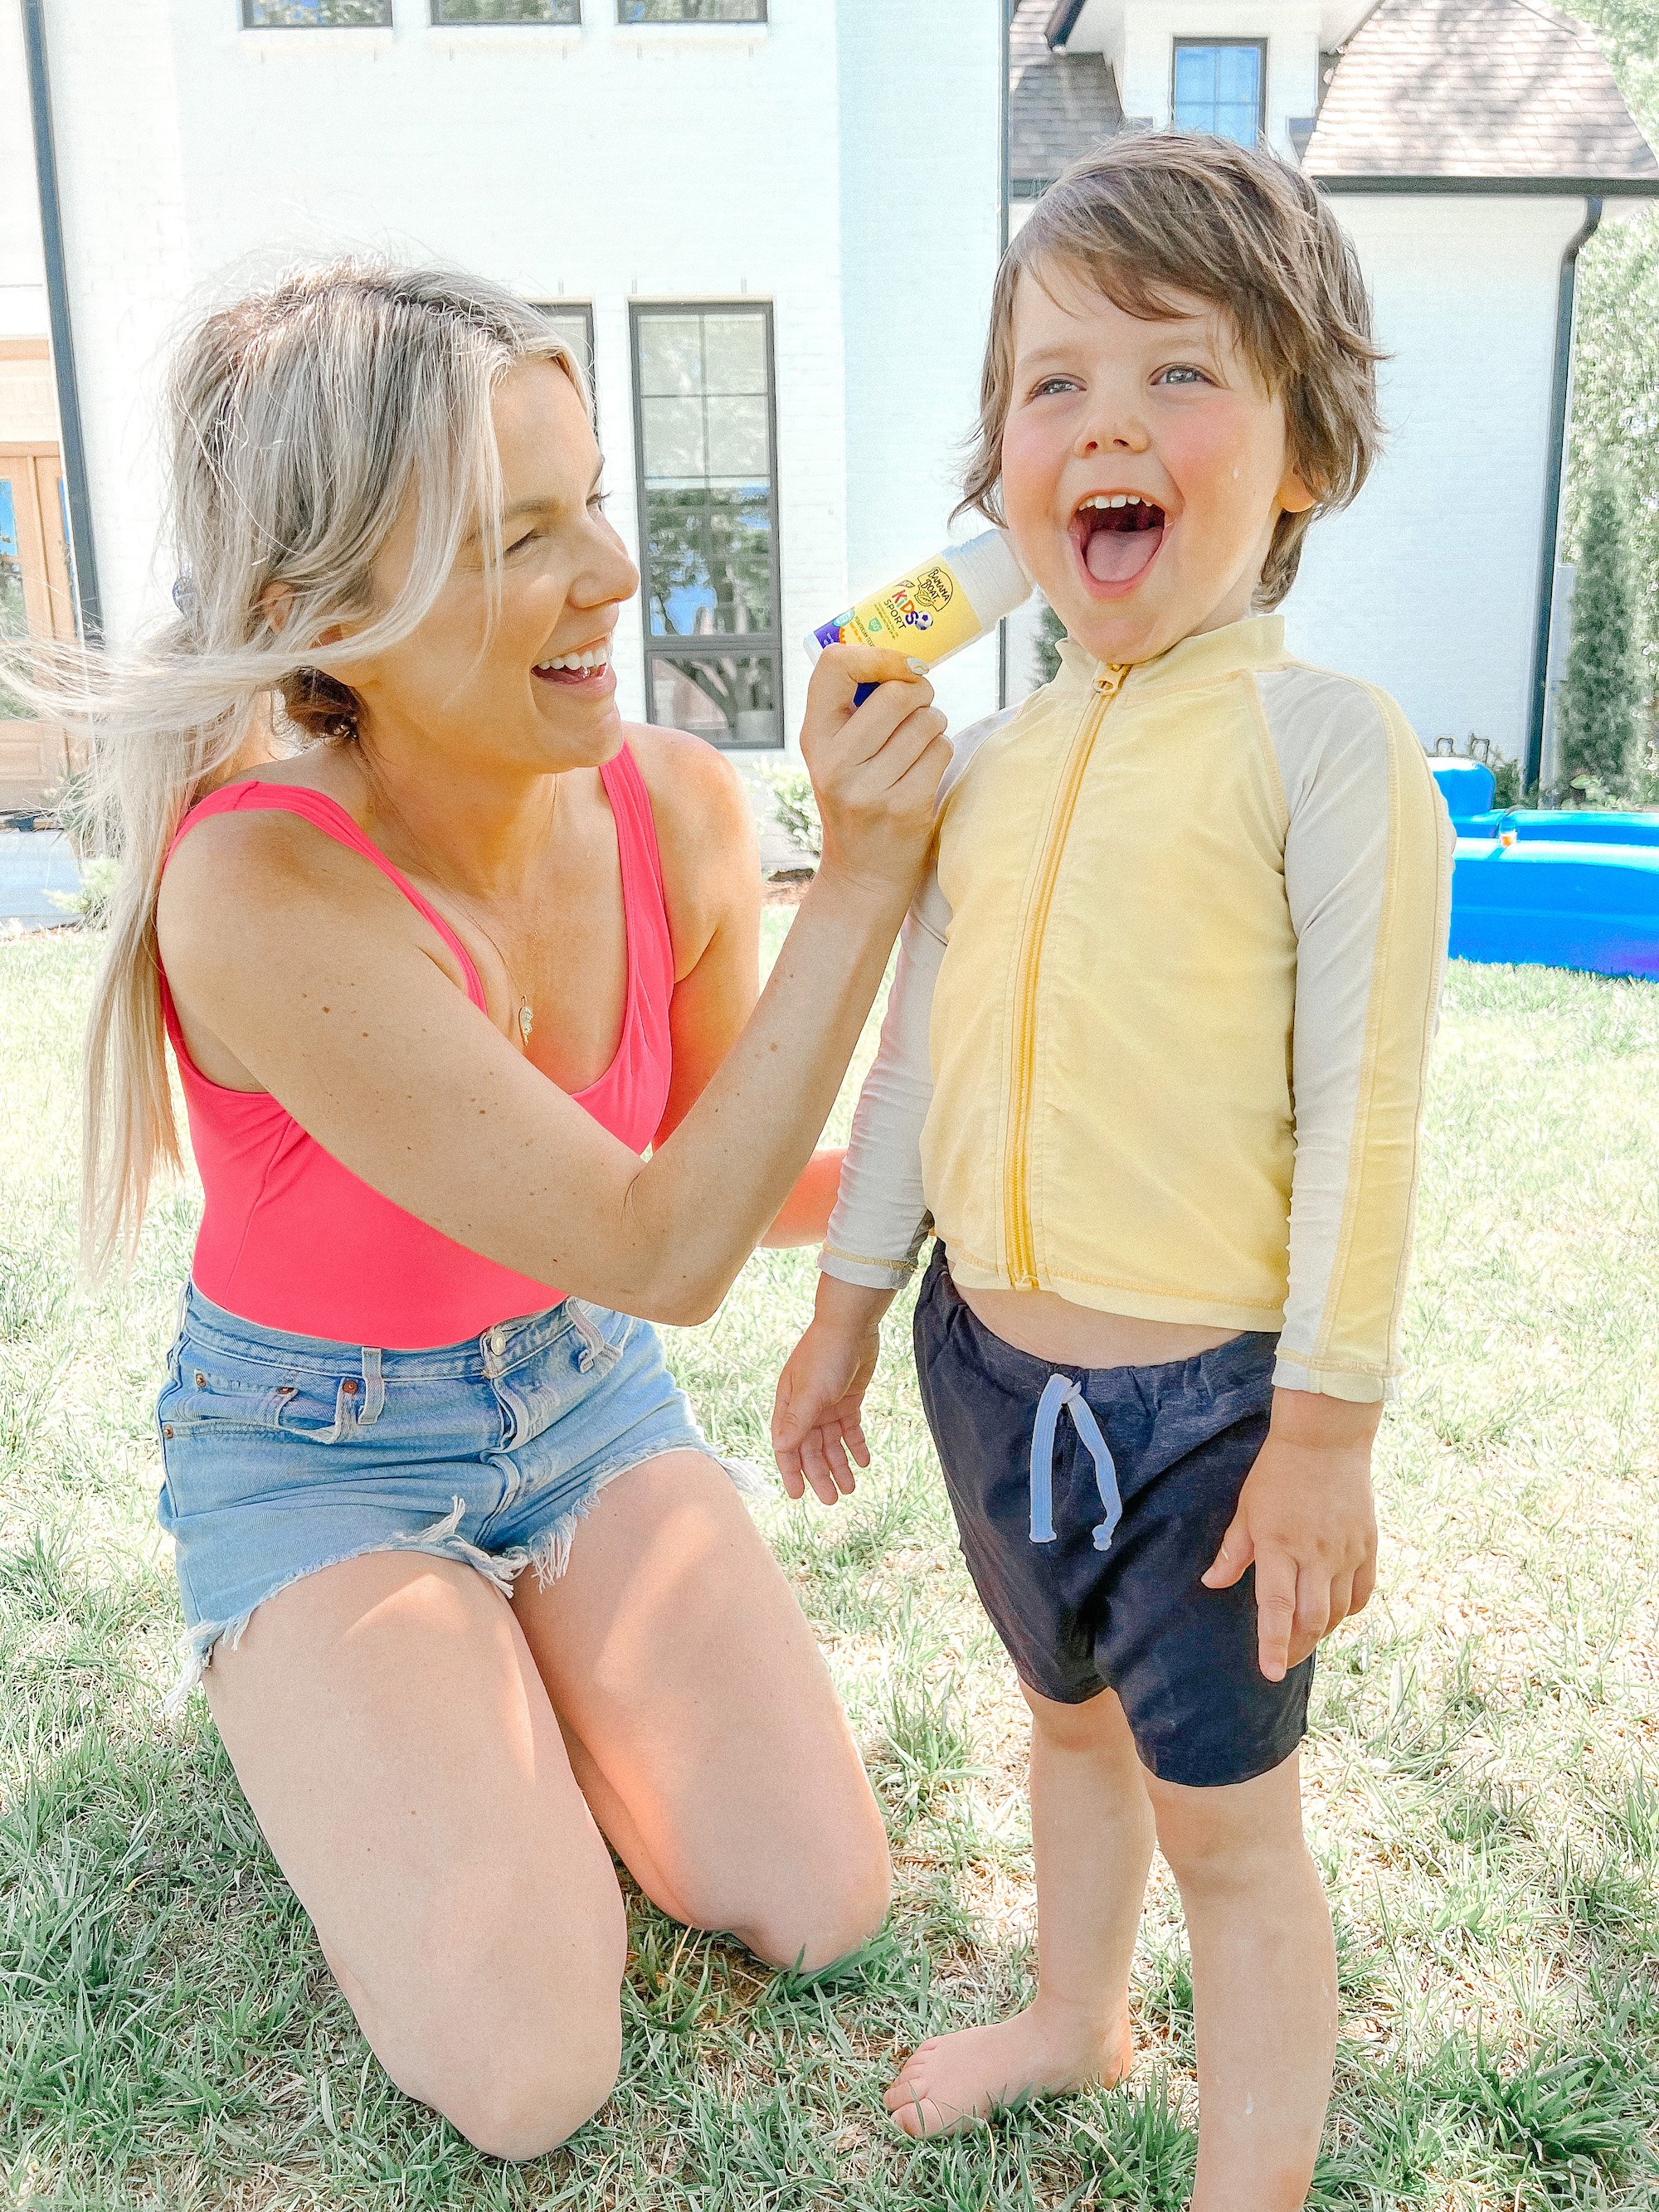 Former 'Bachelorette' Ali Fedotowsky wearing a tank top and jean shorts while putting Banana Boat sunscreen on her son.